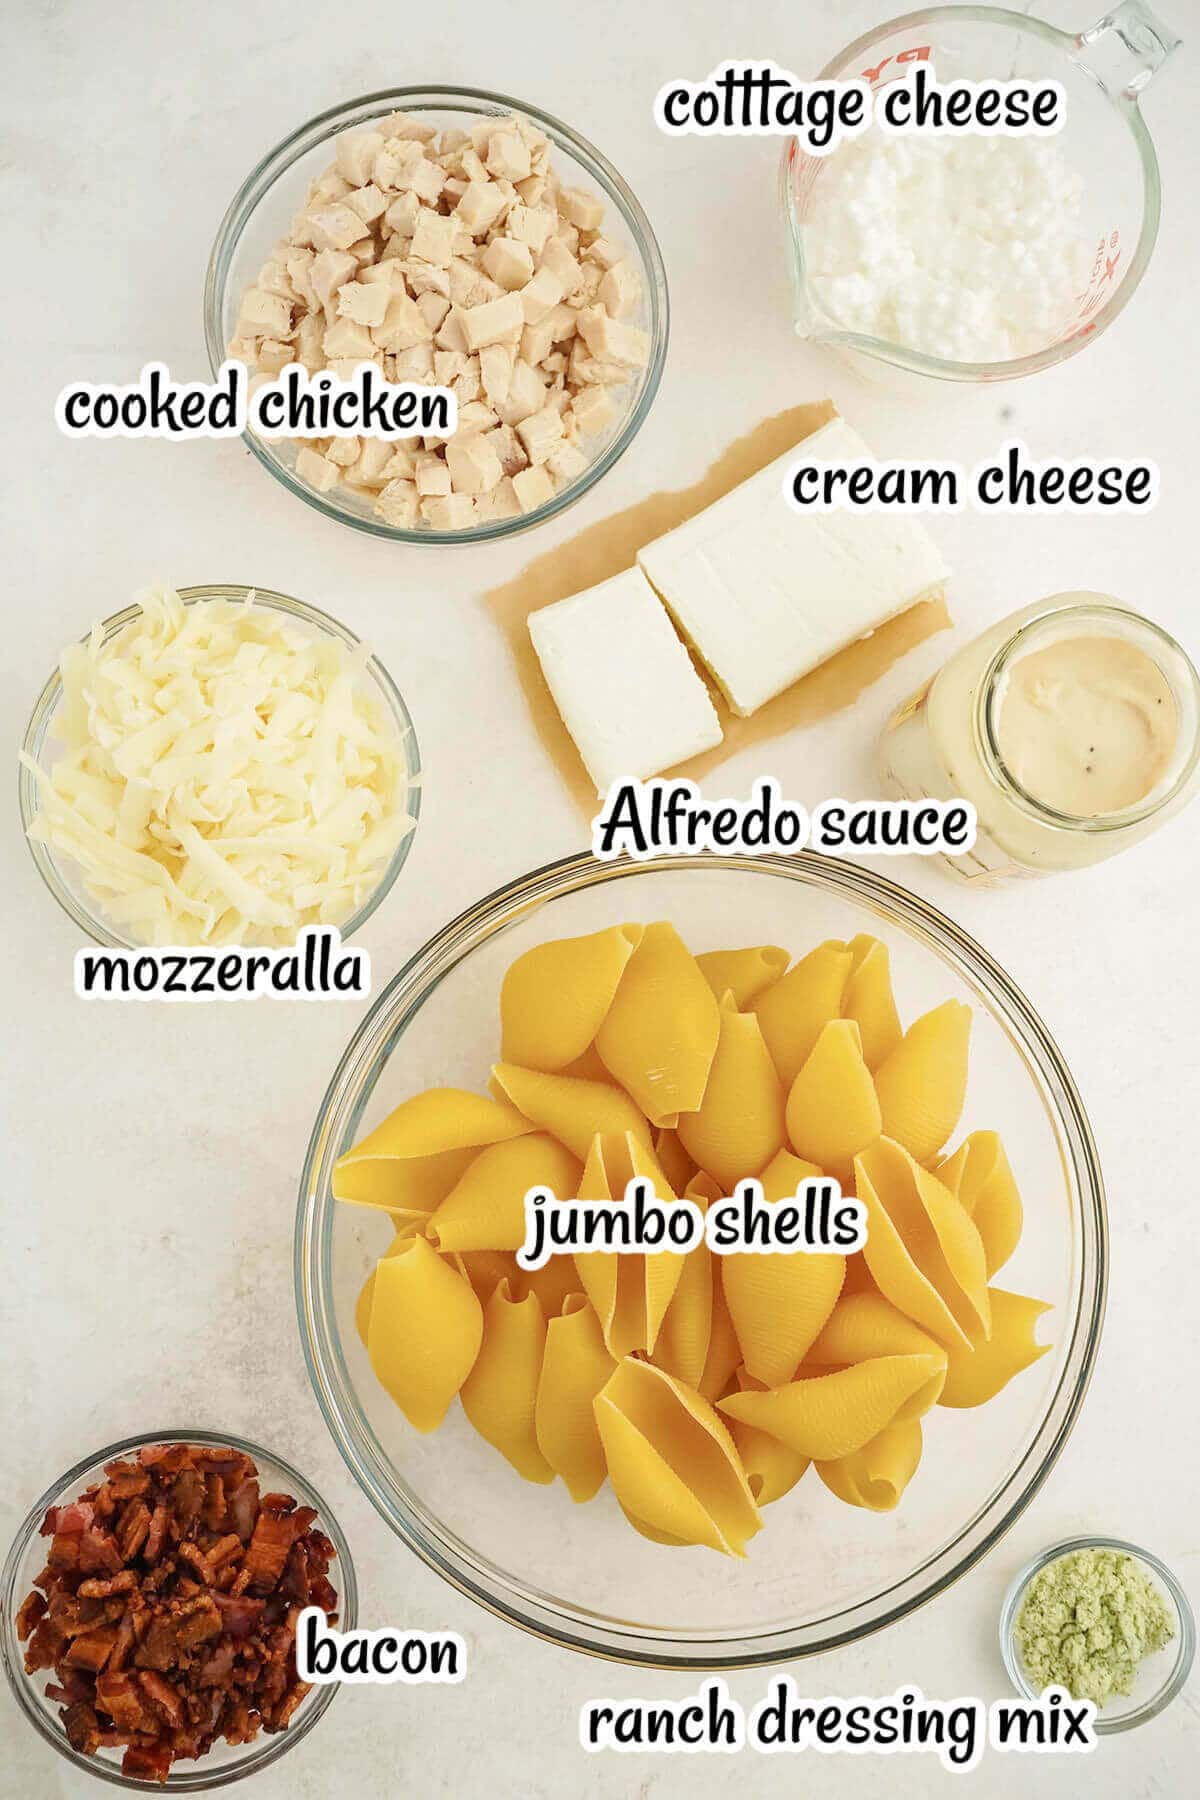 Here are the ingredients you'll need to make this easy recipe!